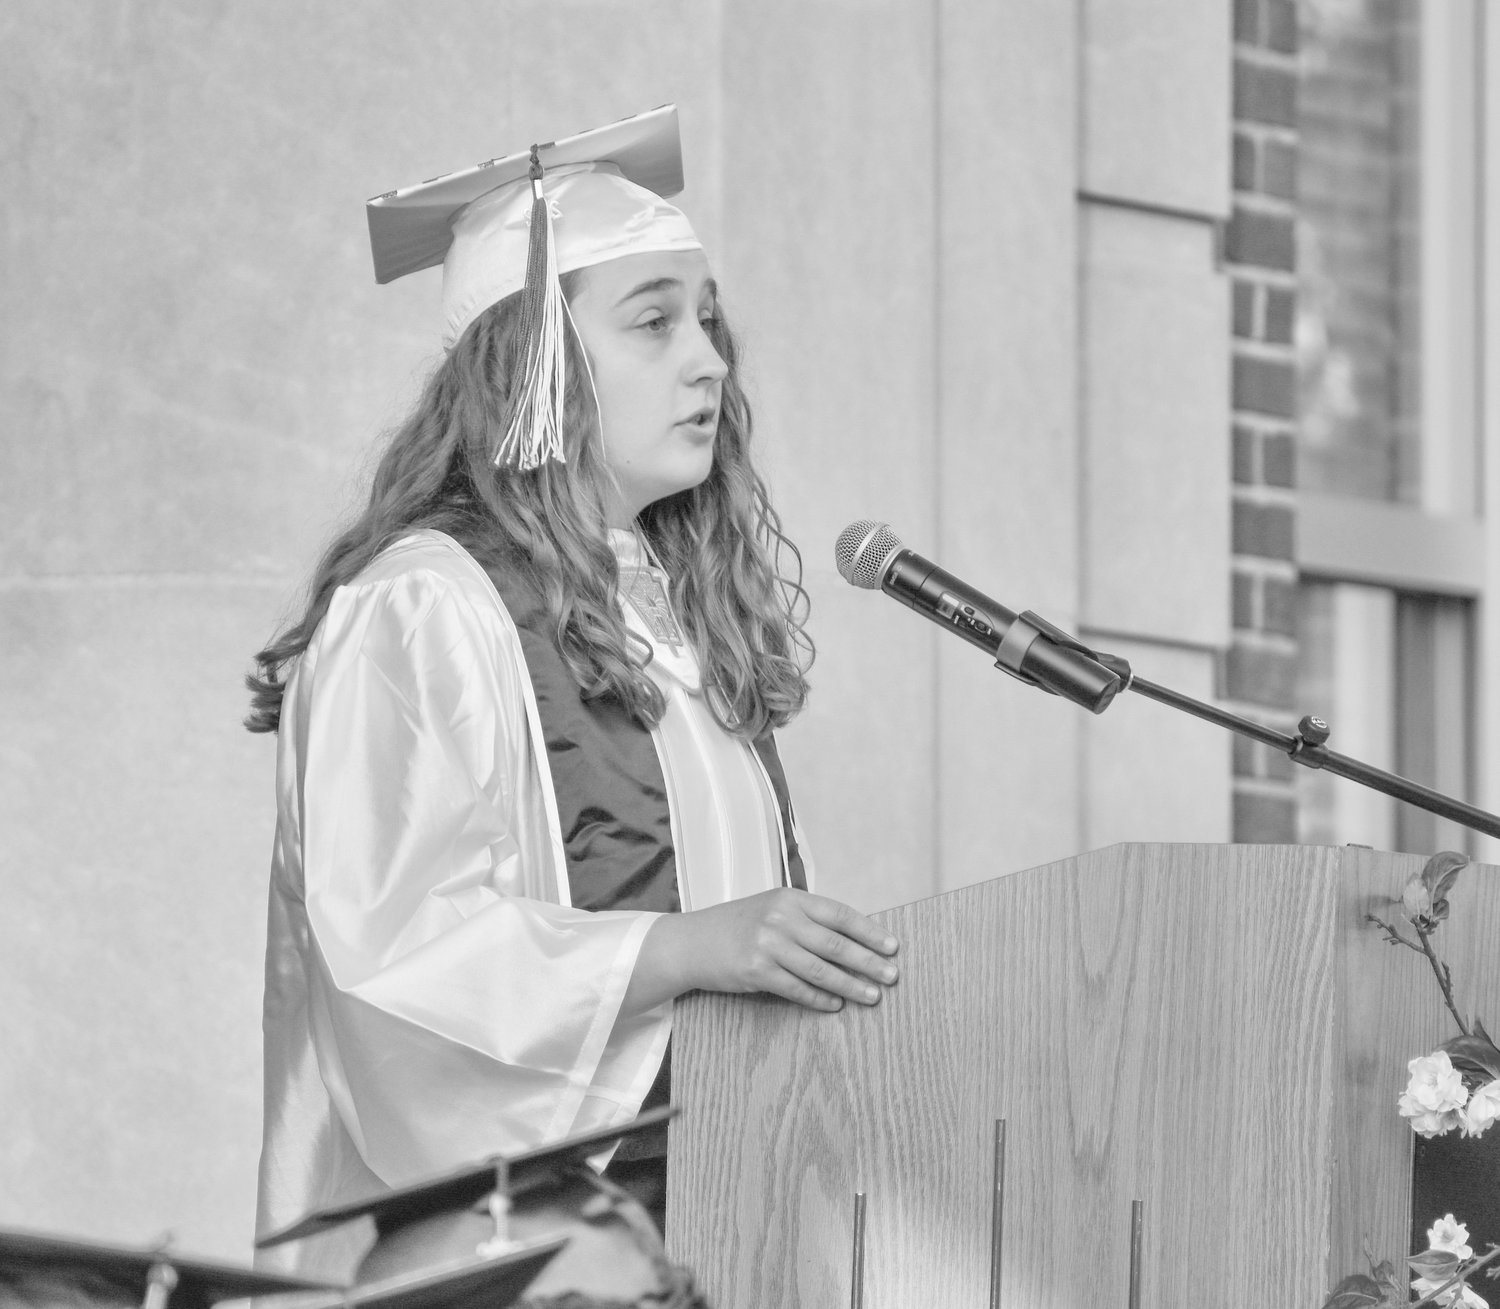 Oriskany Class of 2022 Valedictorian Anna Zumbrun shares remarks with the crowd during the class’s commencement ceremony.